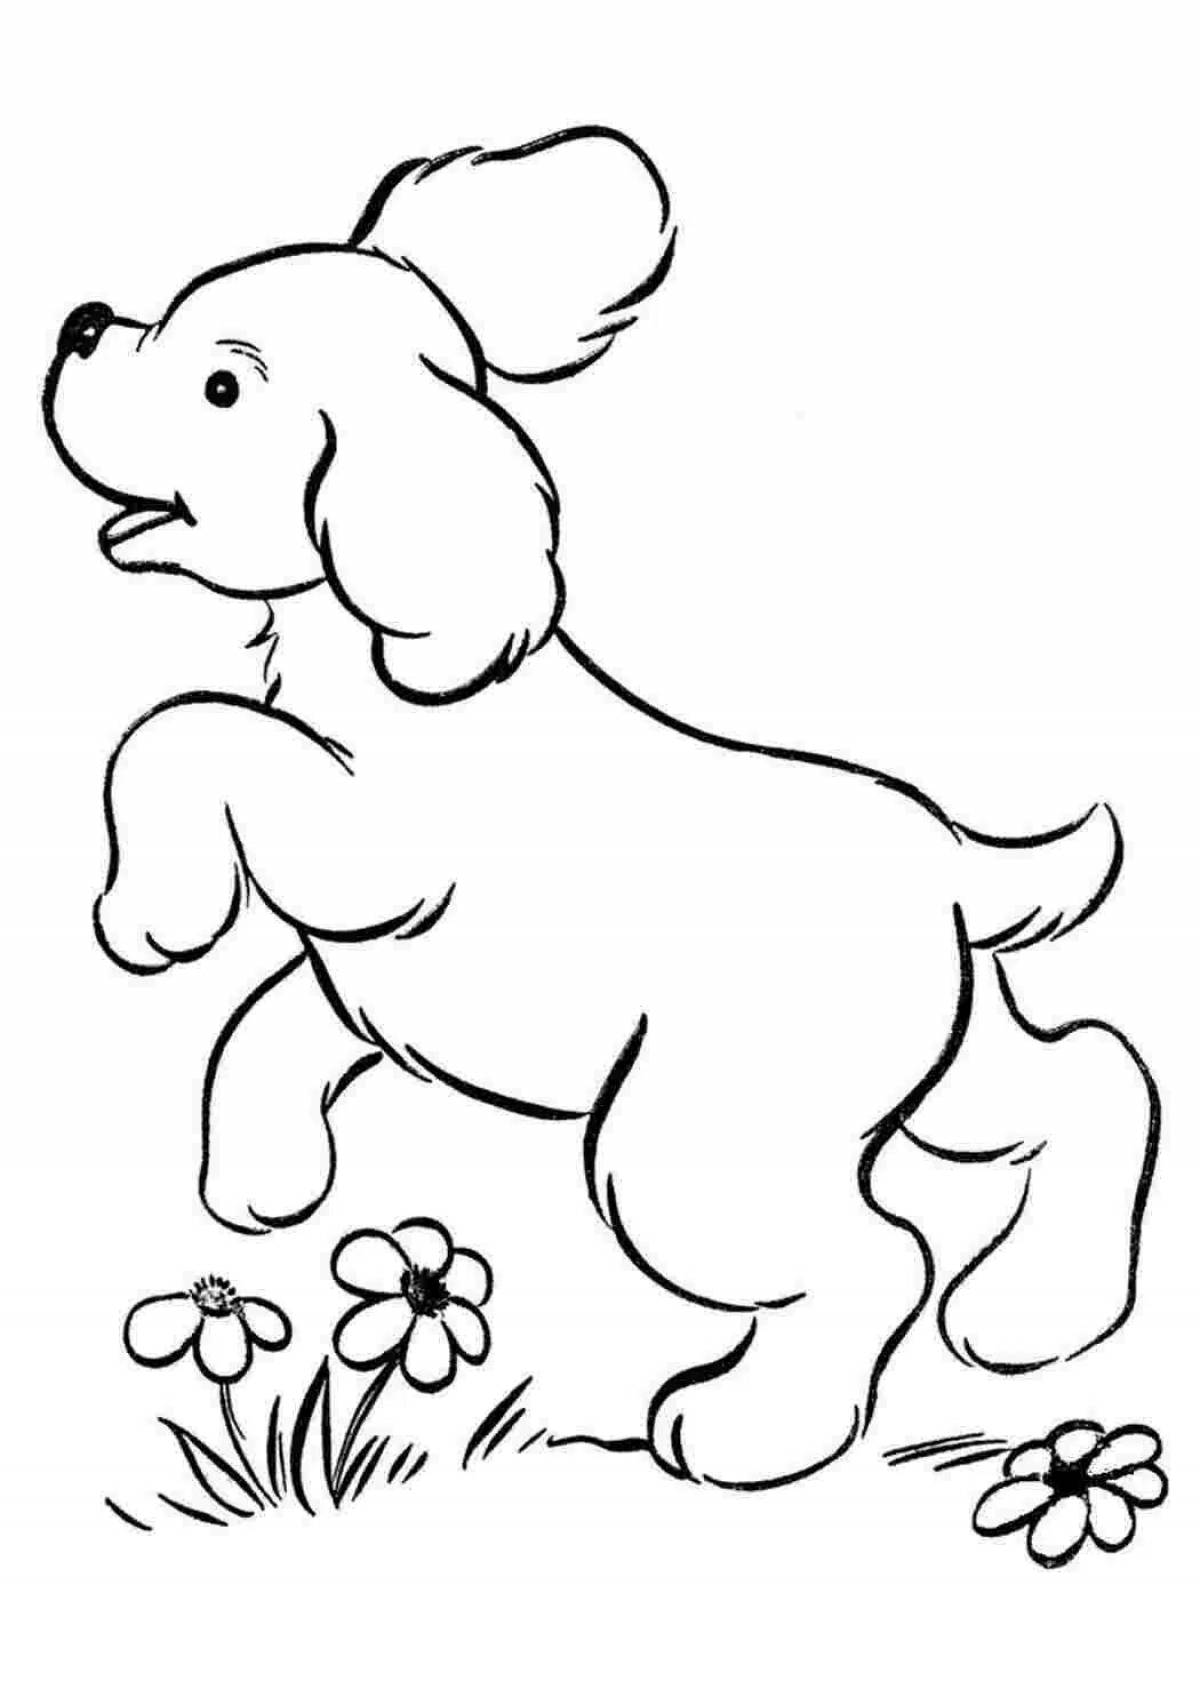 Friendly pet dog coloring book